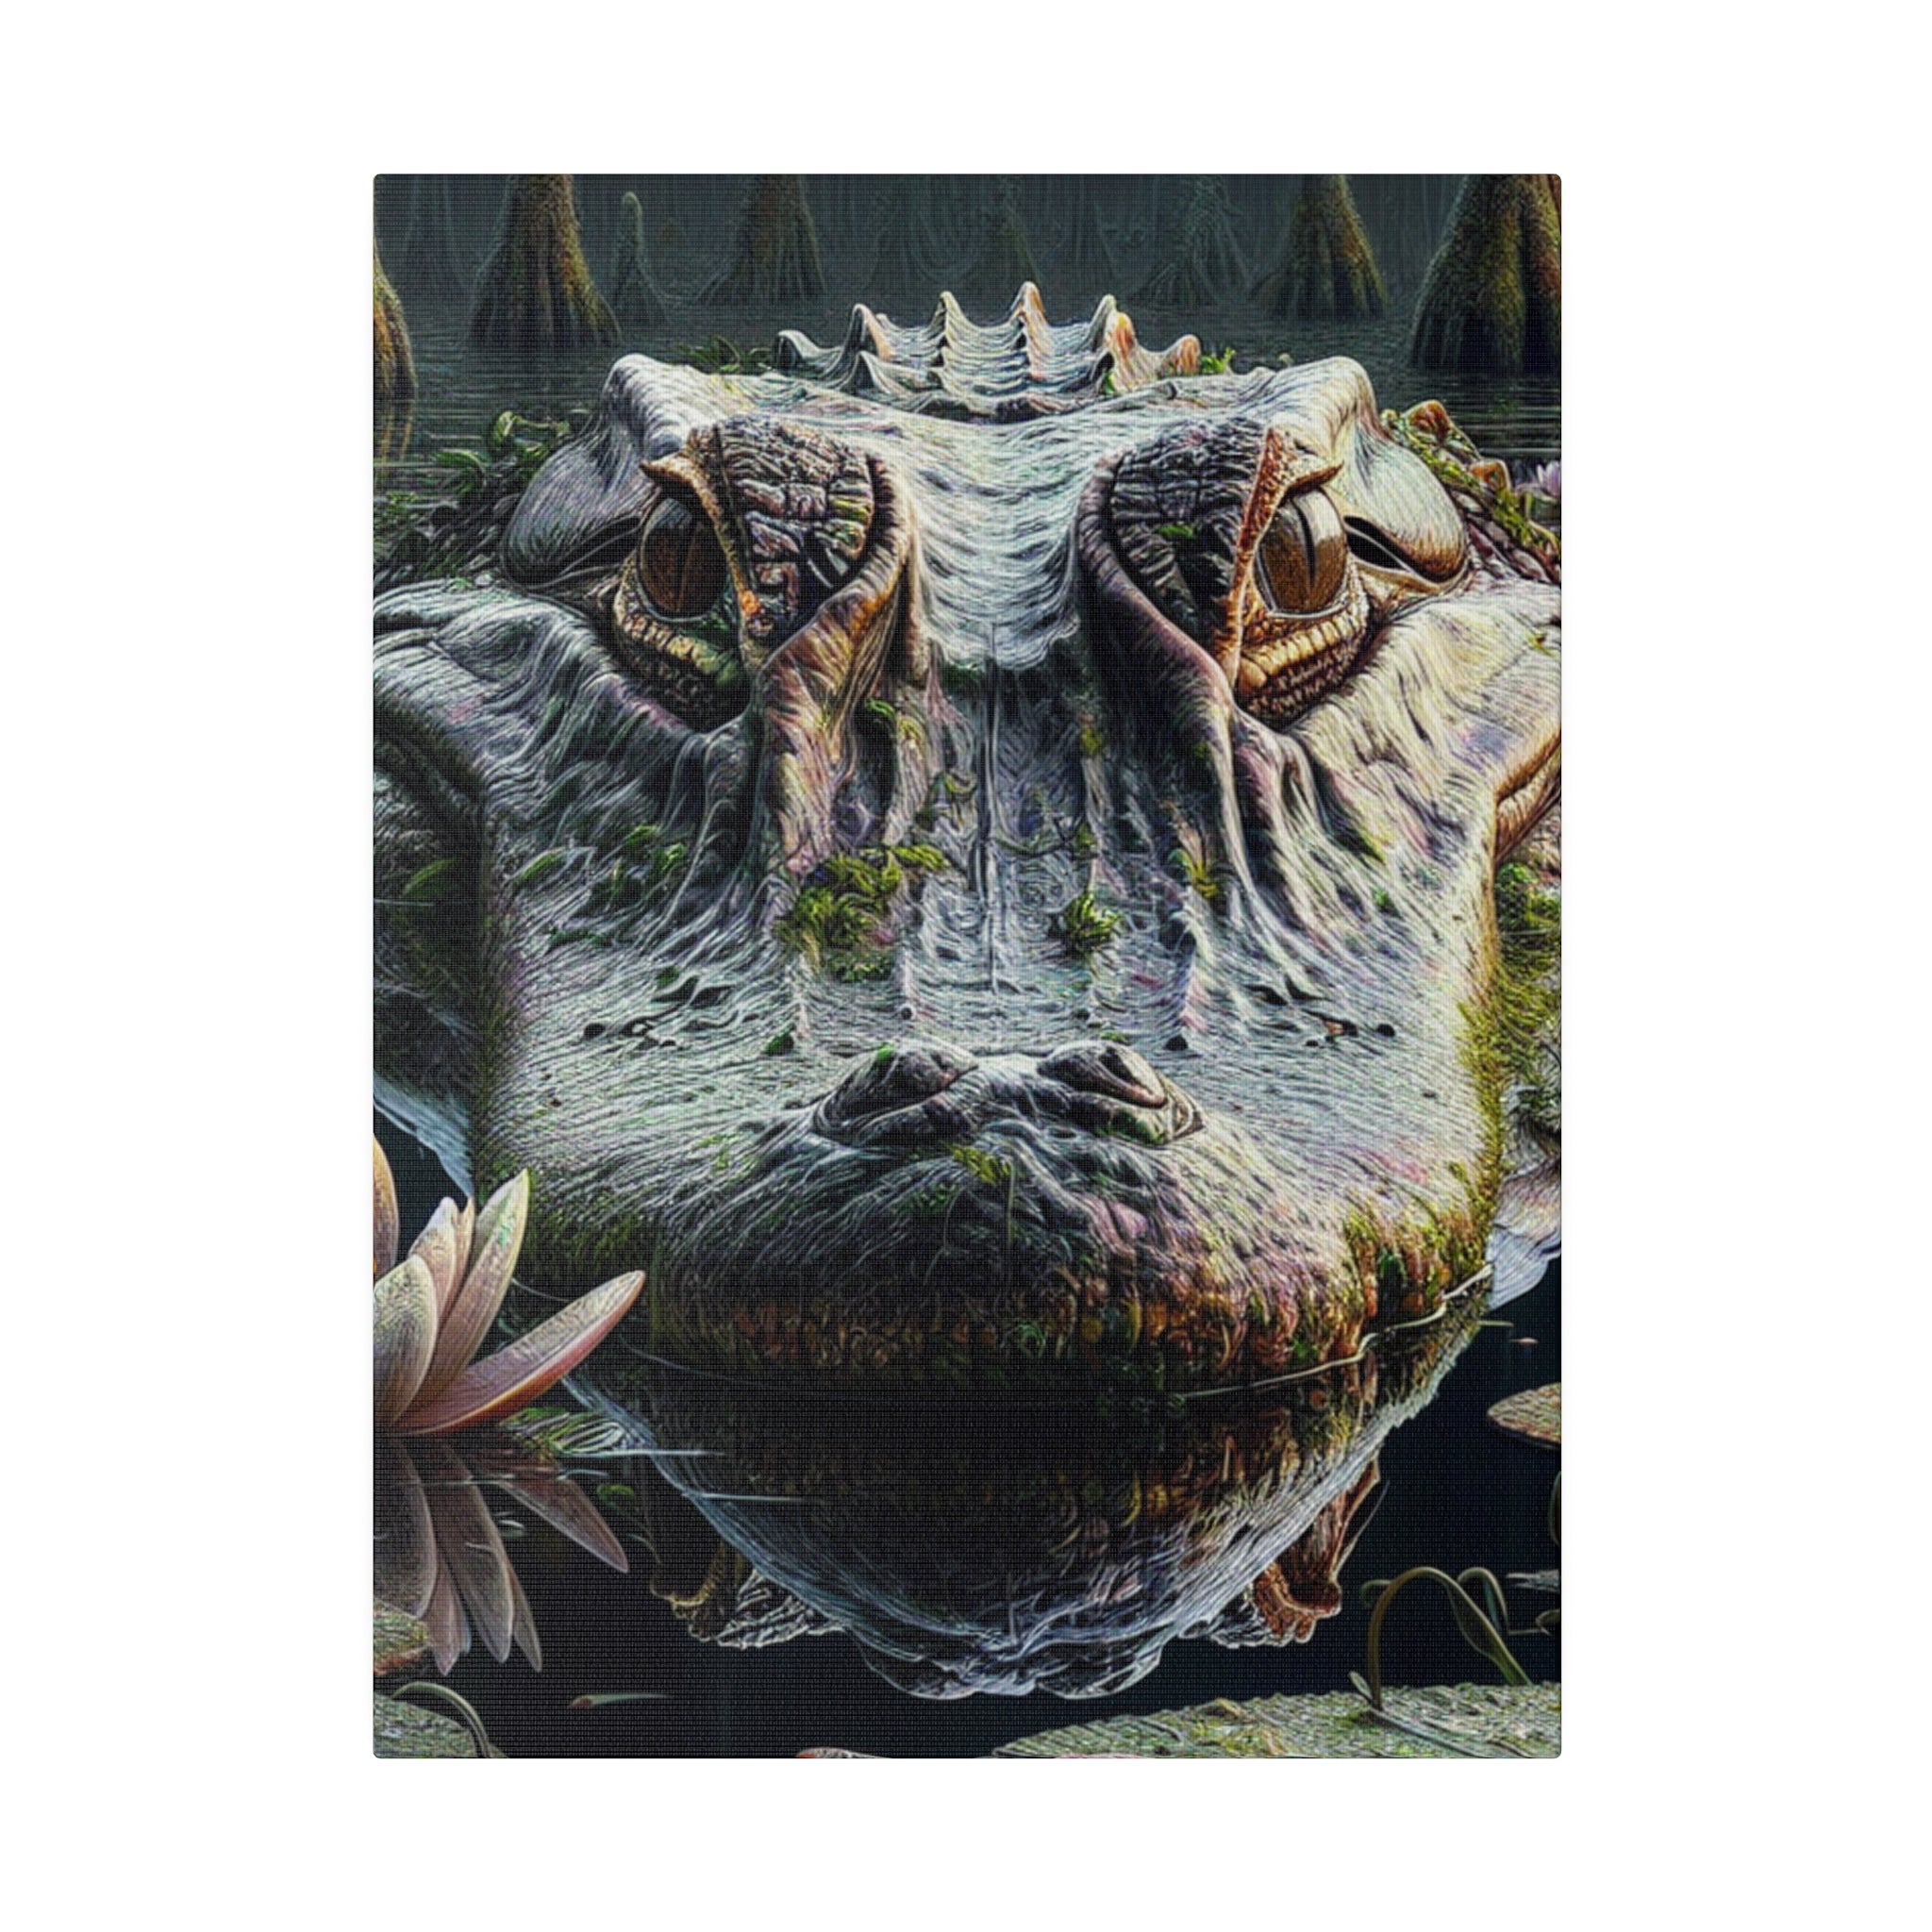 "Alligator Impressions: Luxe Canvas Wall Art"